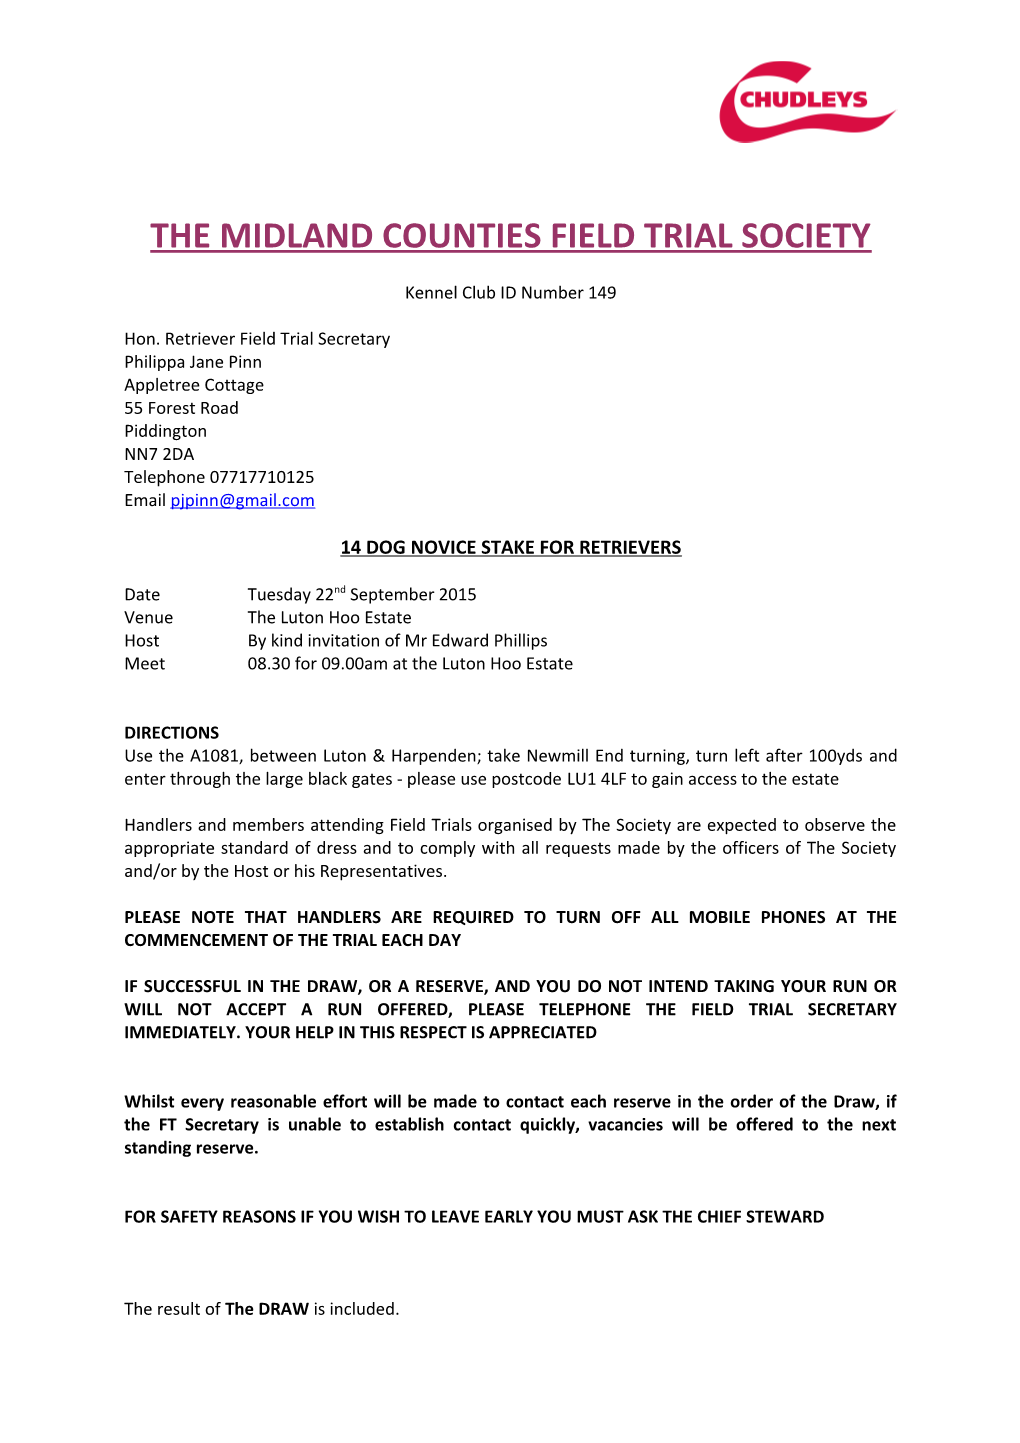 The Midland Counties Field Trial Society